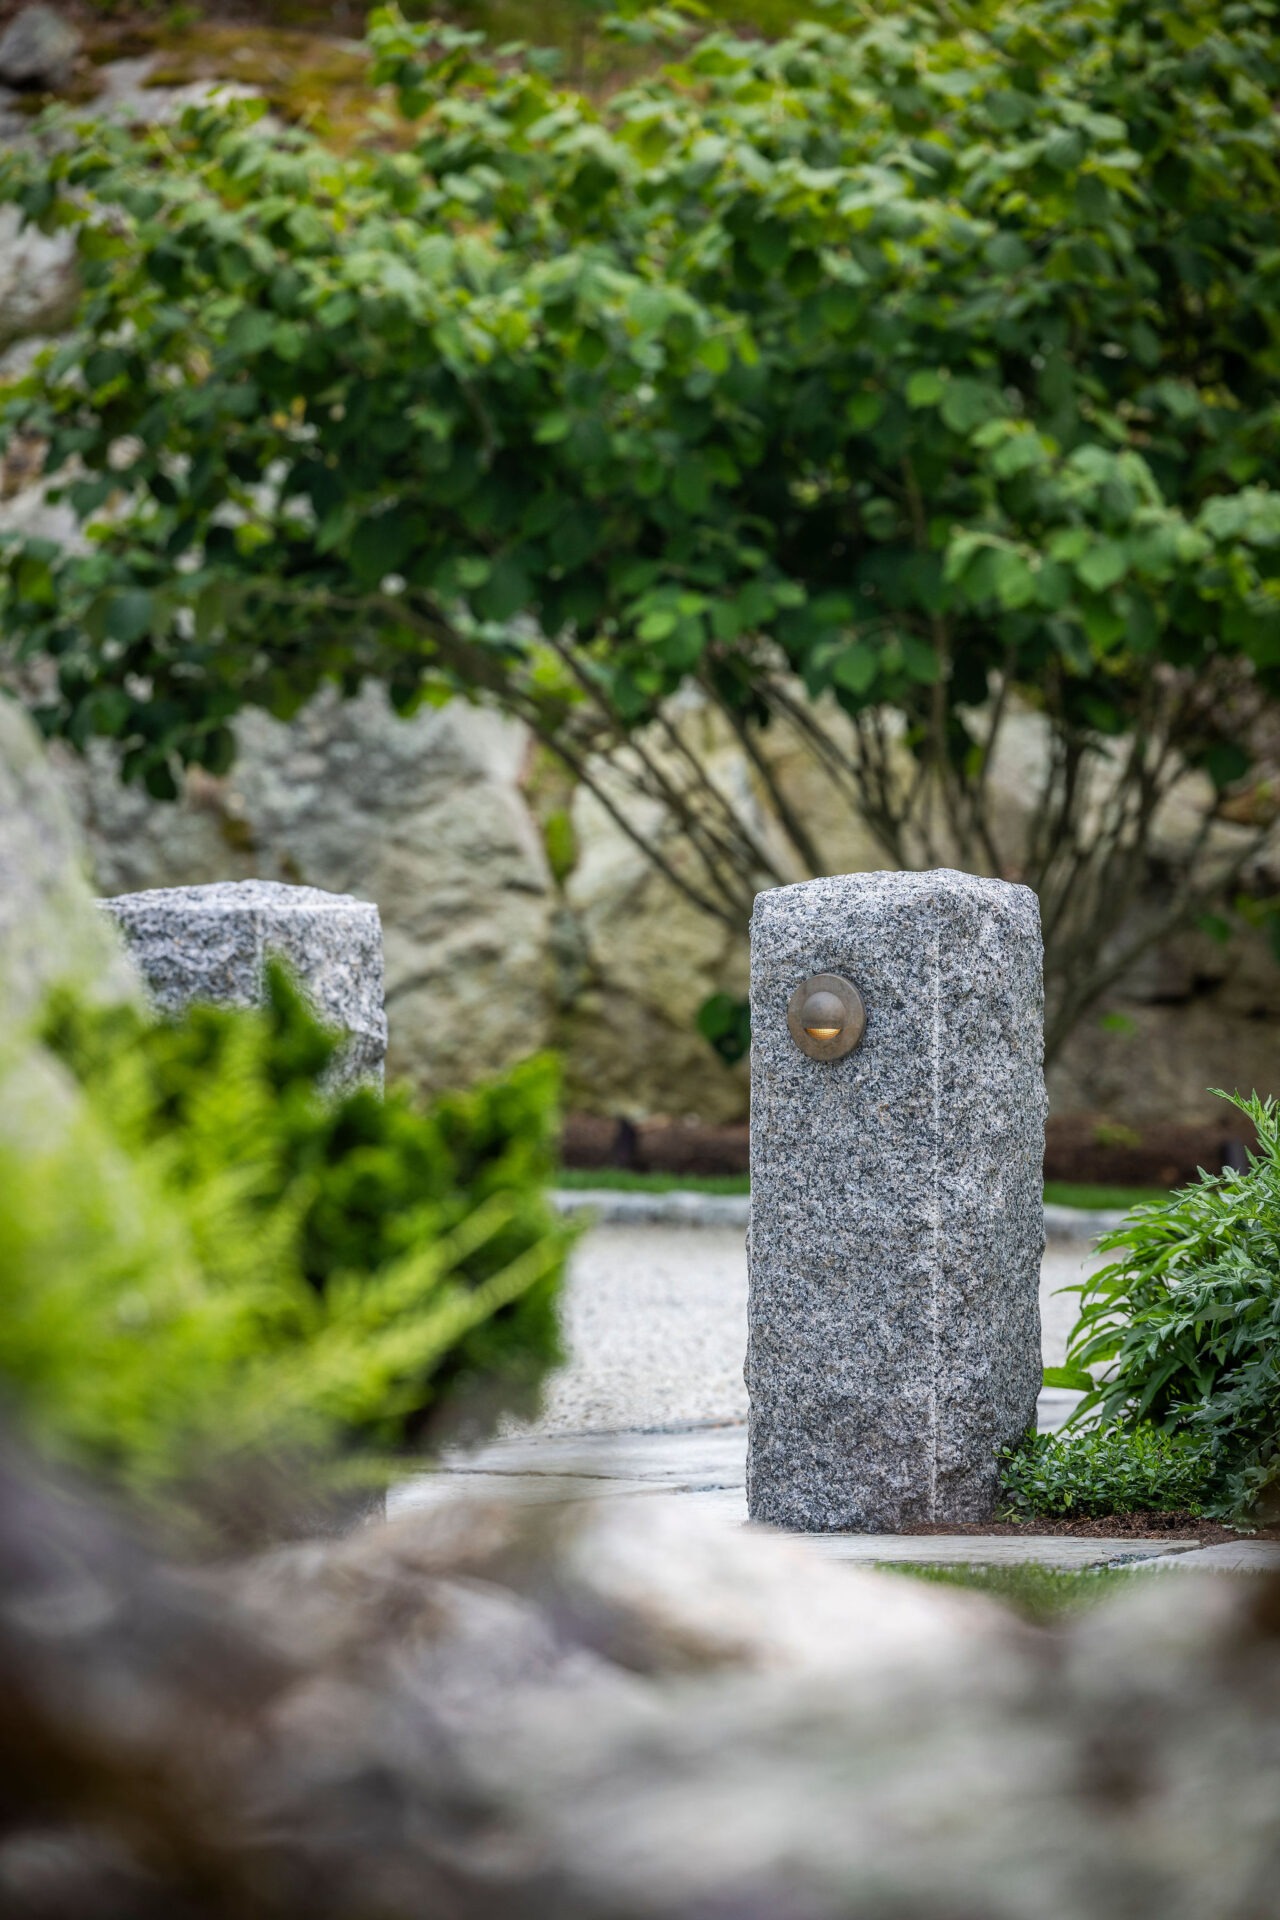 This image features two granite posts with round features, possibly lights, set in a tranquil garden with lush greenery and a pebbled path.